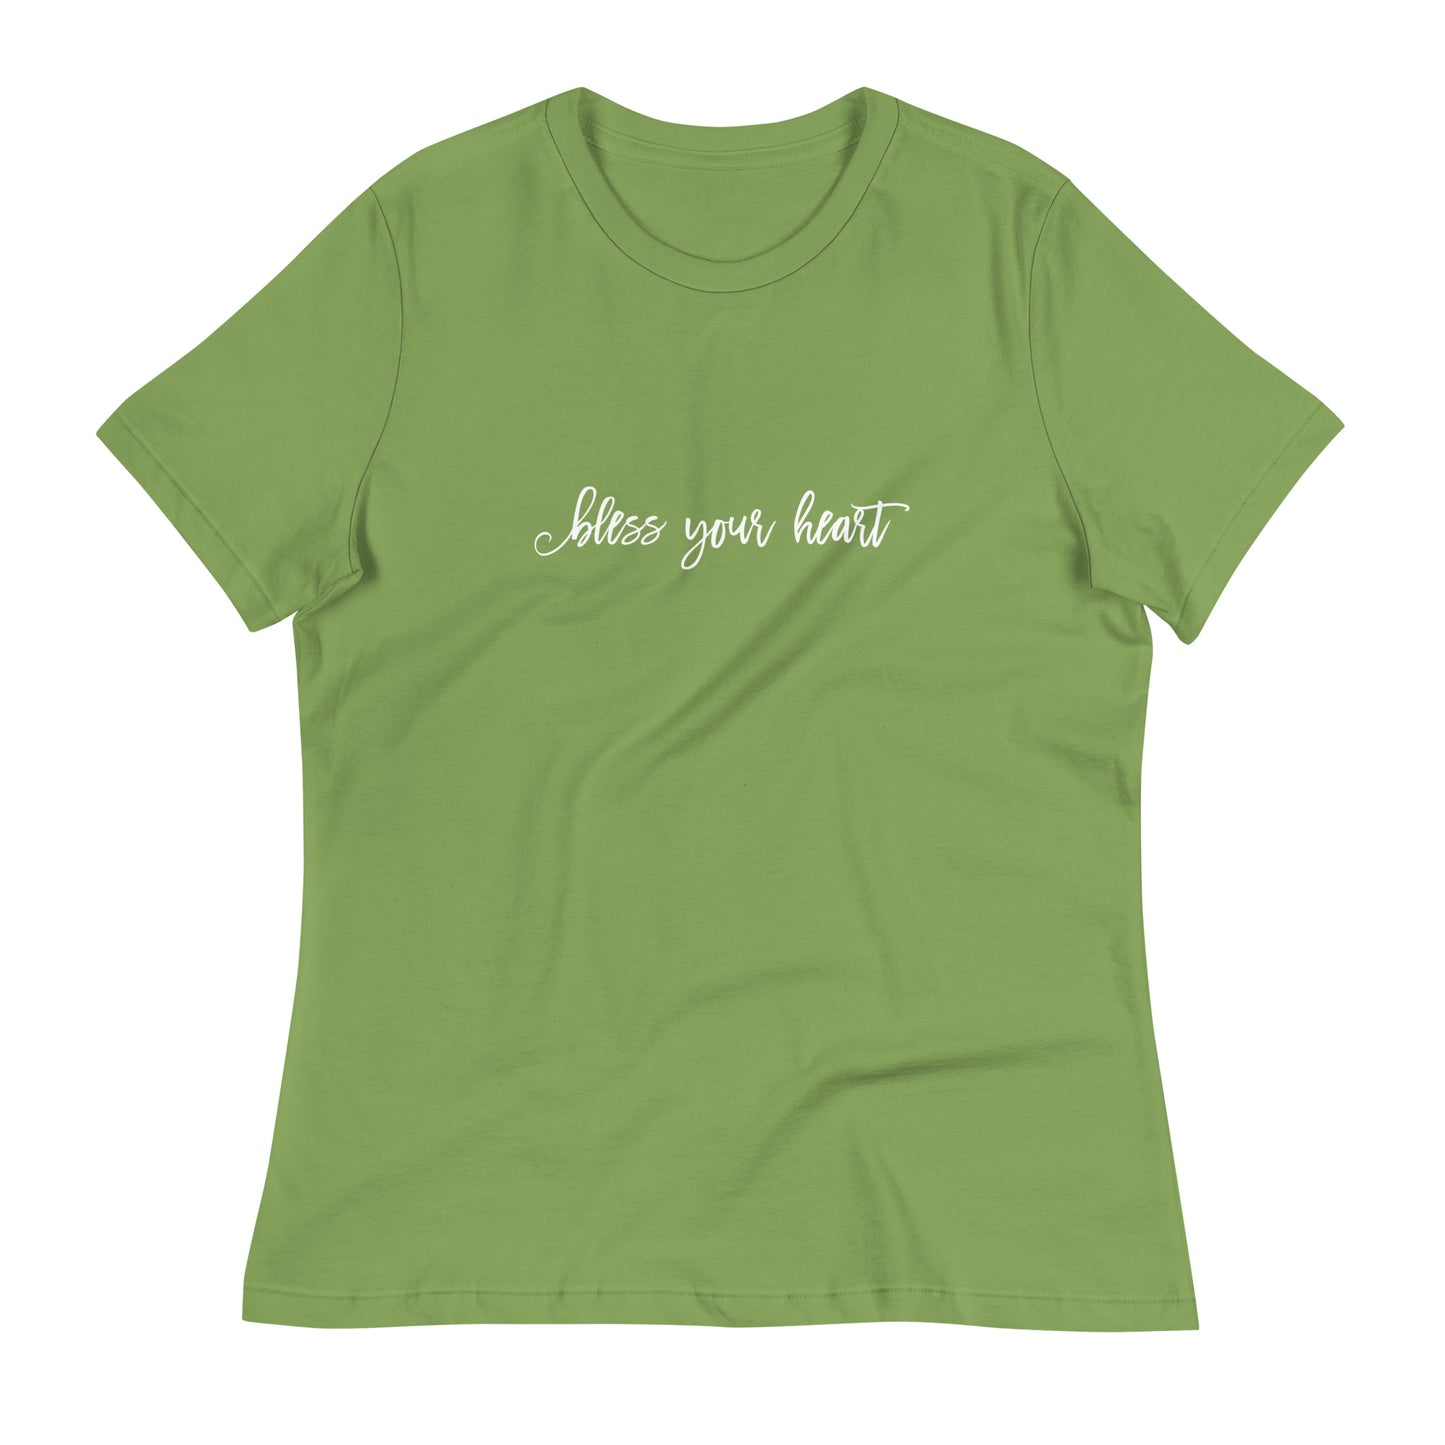 Leaf green women's relaxed fit t-shirt with white graphic in an excessively twee font: "bless your heart"